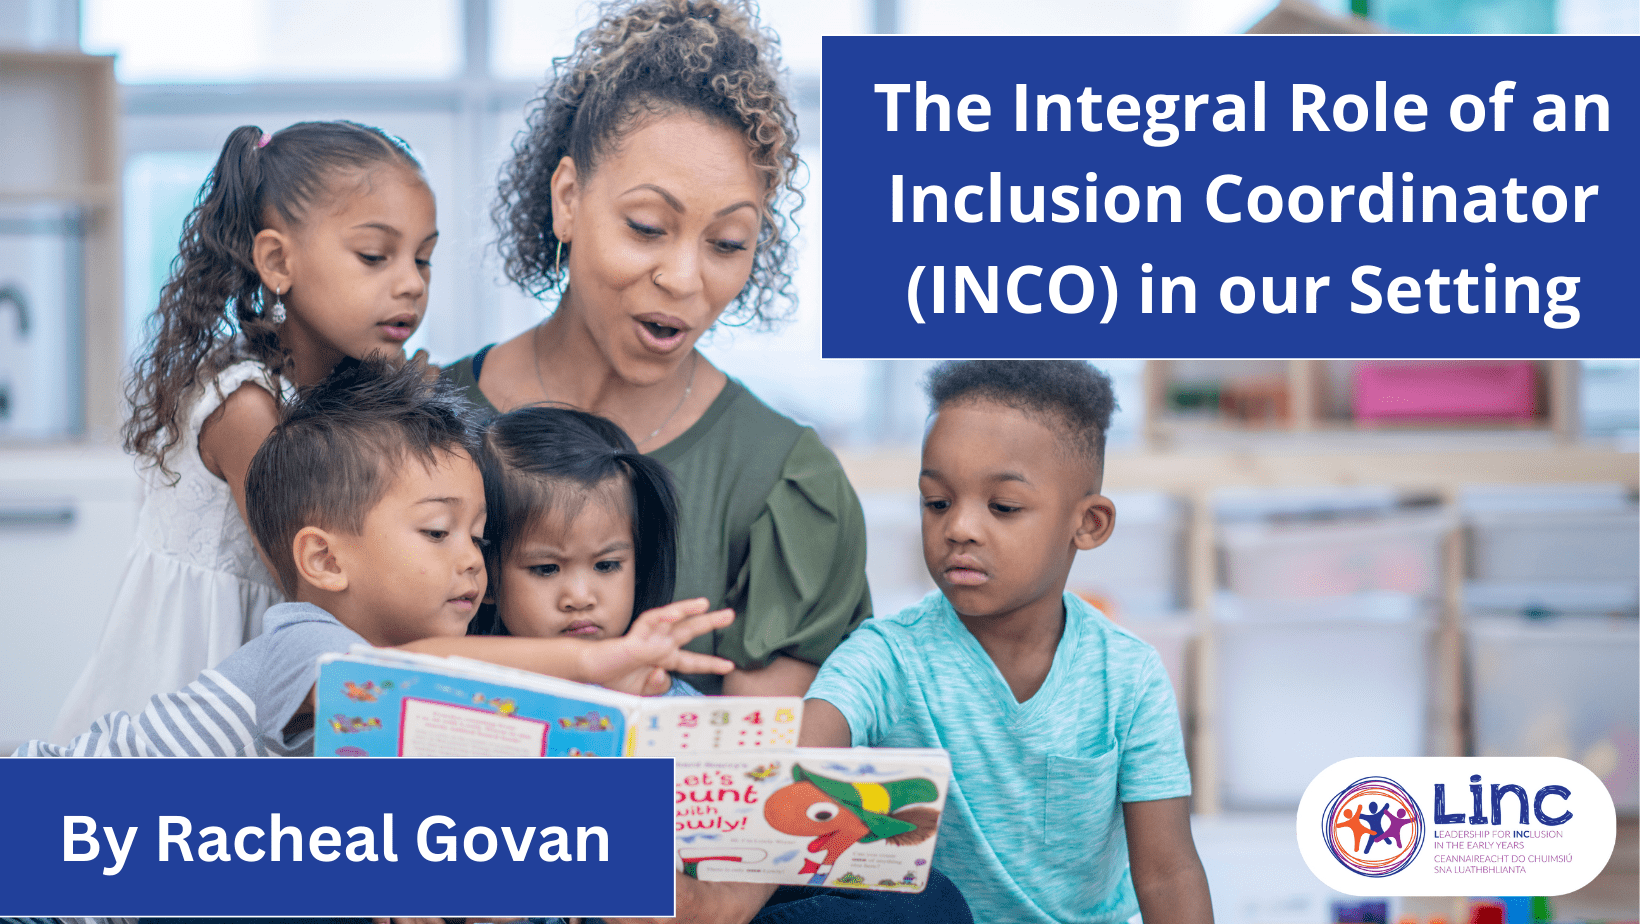 The Integral Role of an Inclusion Coordinator (INCO) in our Setting